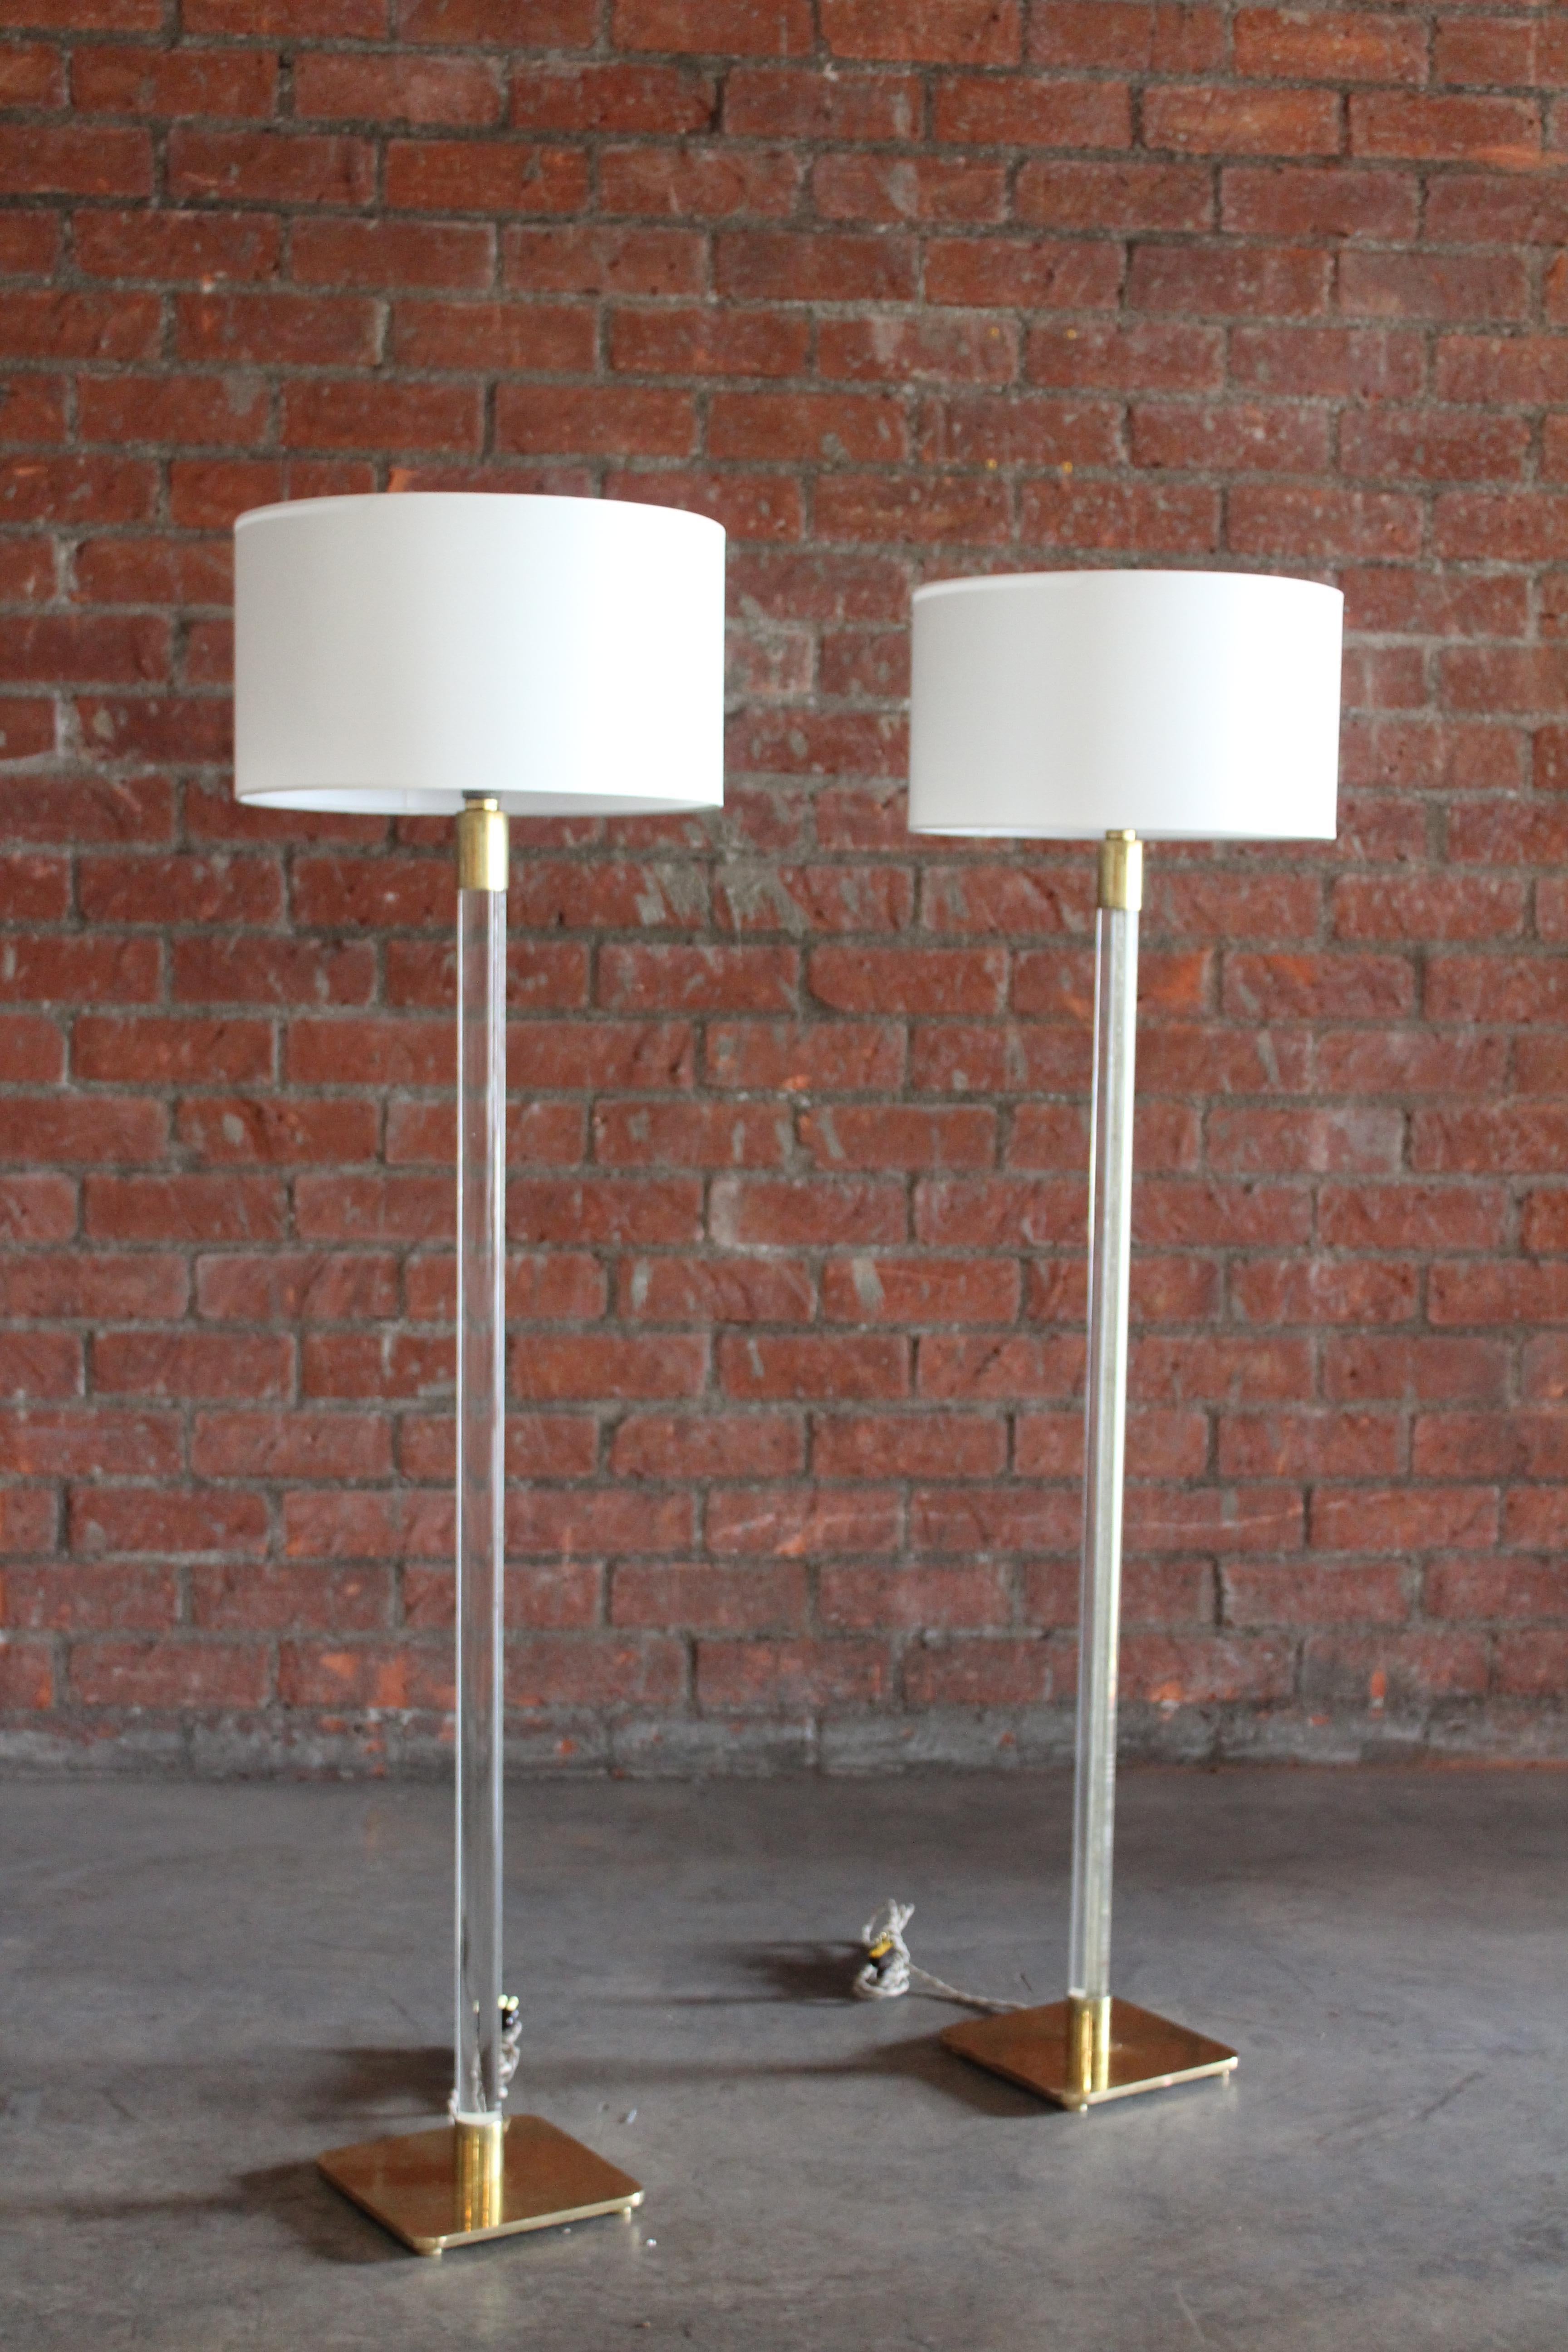 Pair of Glass & Brass Floor Lamps by Hansen, NYC, 1970s For Sale 6